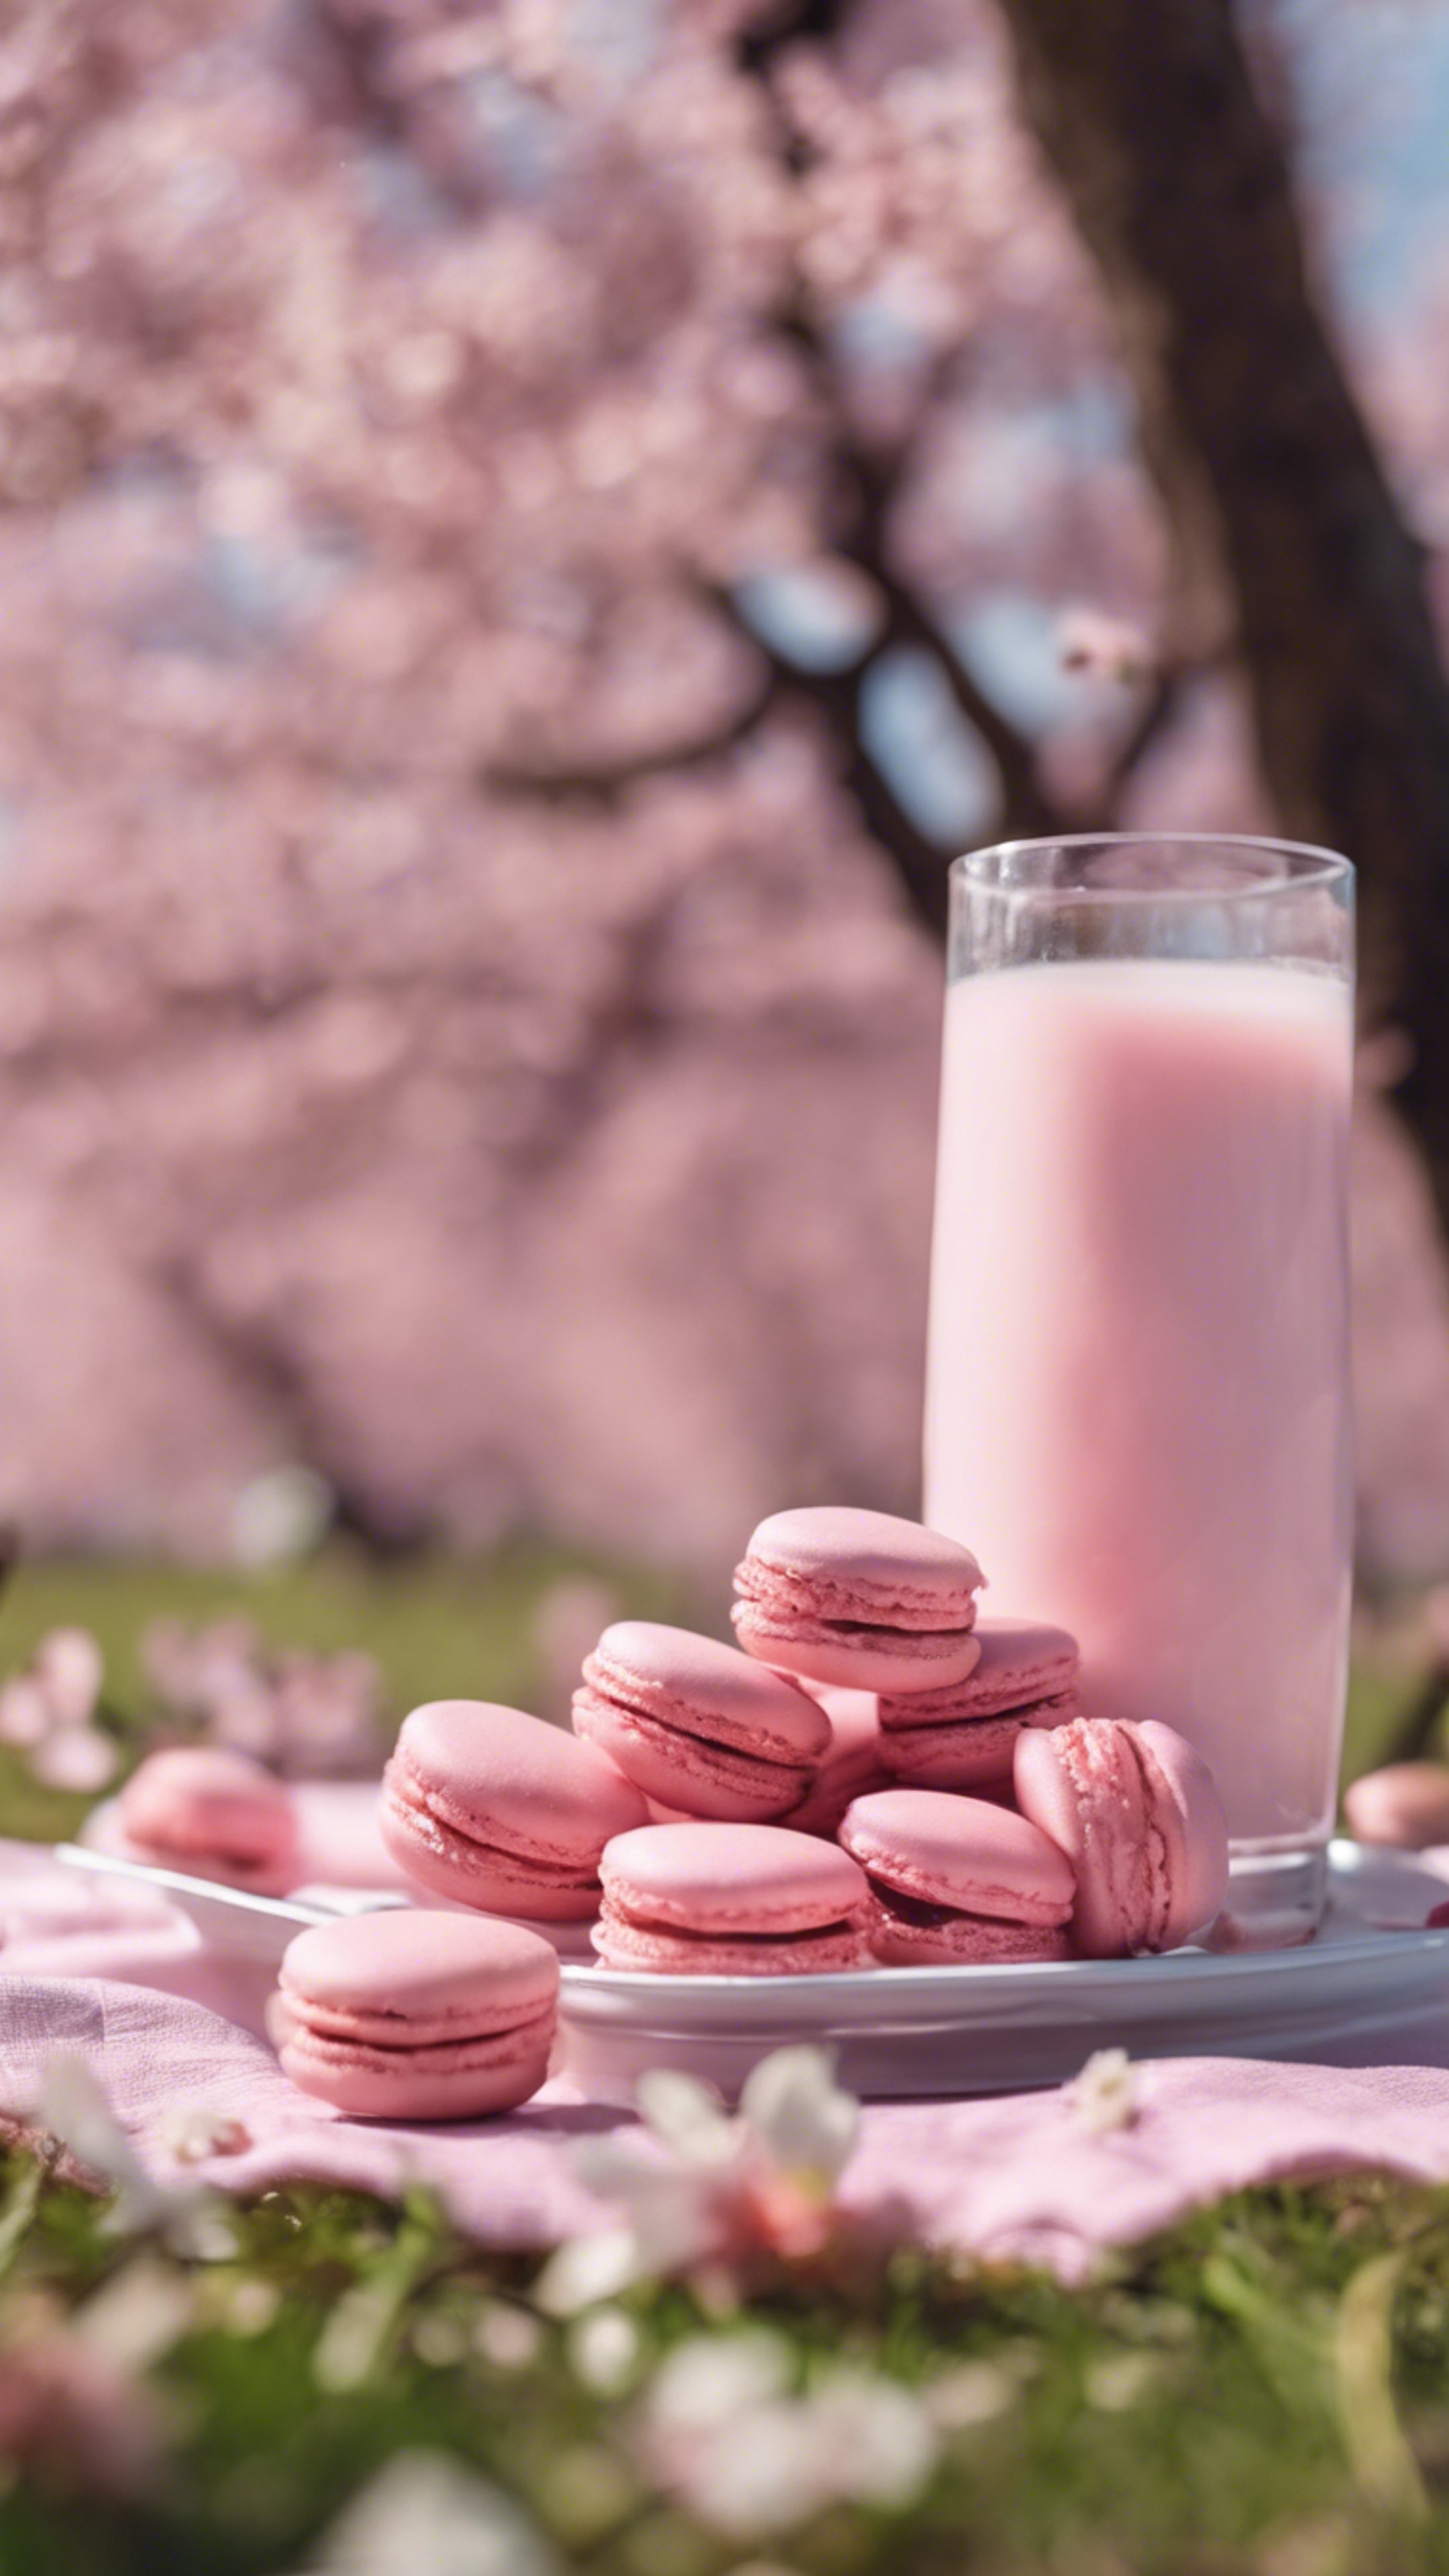 A picnic under the cherry blossoms with pink macaroons and strawberry milk. Тапет[97540e72ef6b46bcbaa8]